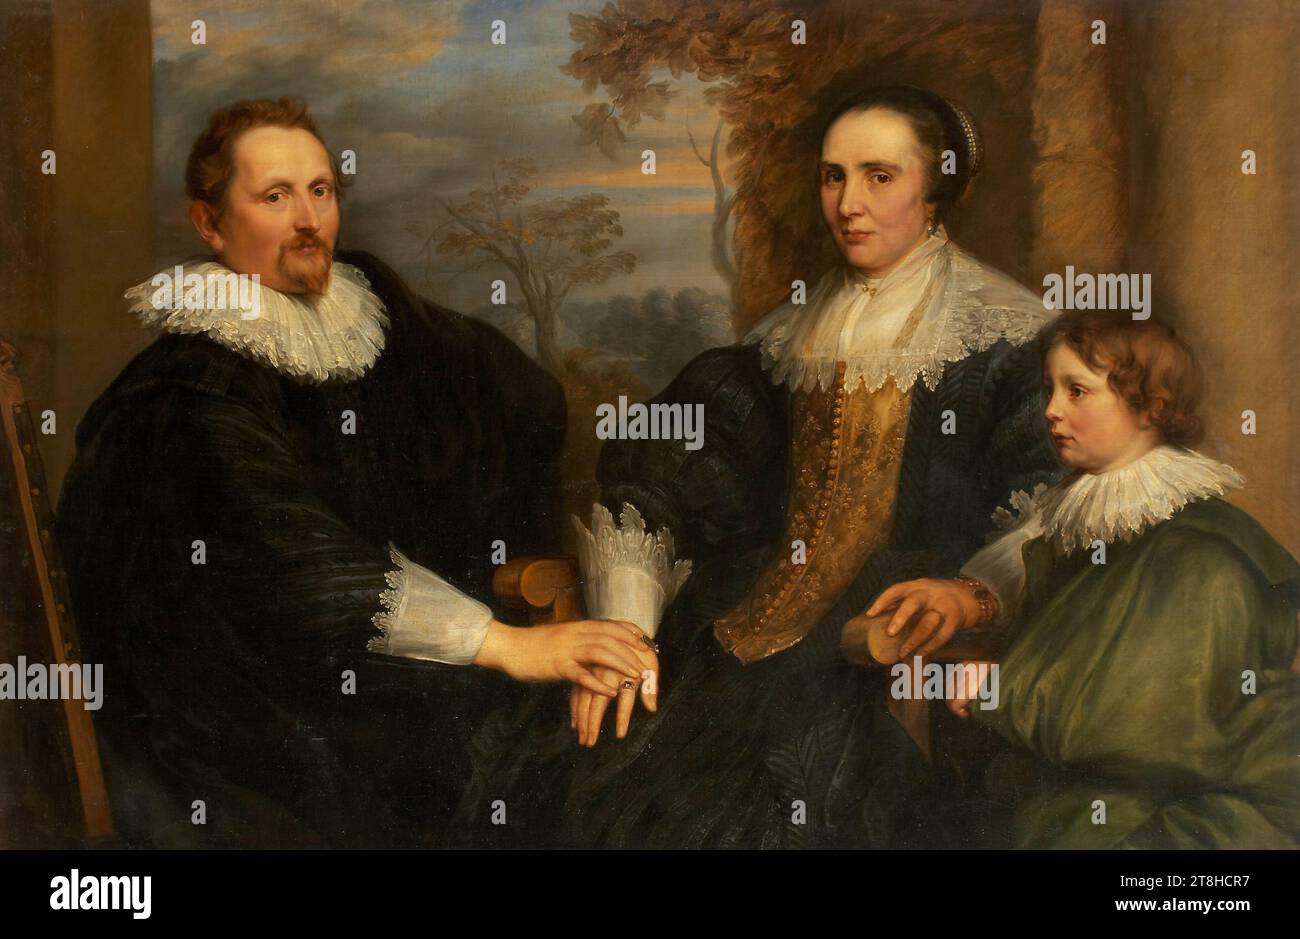 Copy after ANTHONIS VAN DYCK, portrait of Sebastian Leerse and his family, approx. 1691 - 1740, dimensions, 111.7 x 165.1 cm, oil on canvas, portrait of Sebastian Leerse and his family, painter, copy after ANTHONIS VAN DYCK, 17TH CENTURY 18TH CENTURY, BAROQUE, PAINTING, oil on canvas, CANVAS, OIL, Unmarked Stock Photo